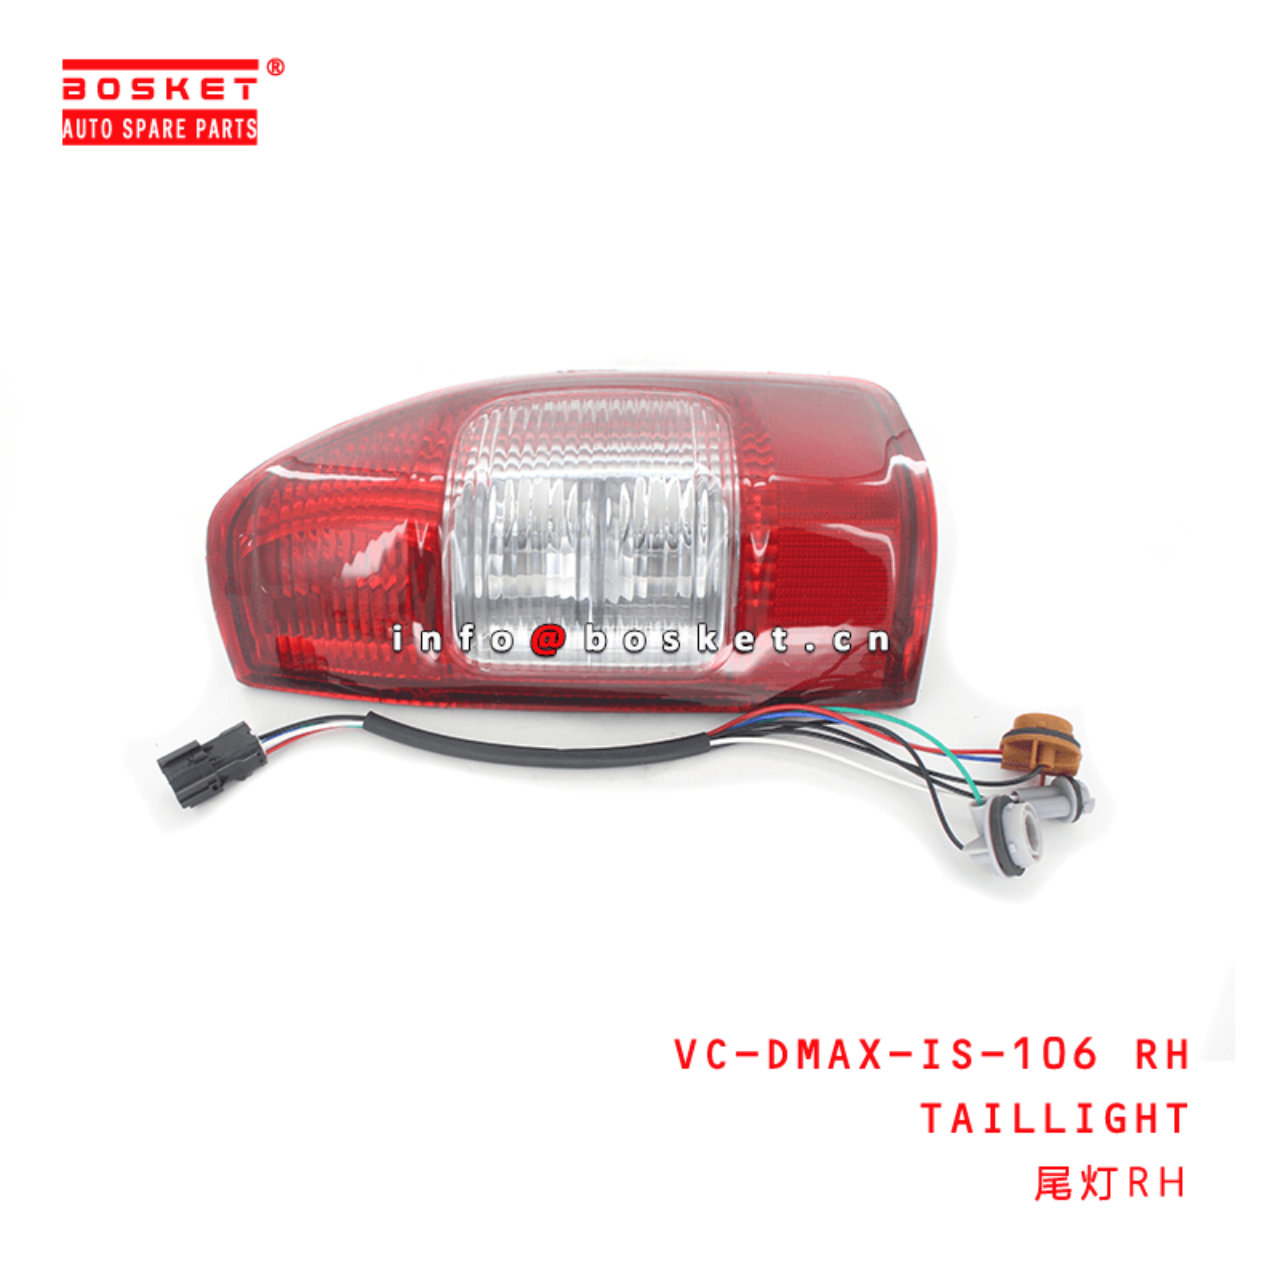  VC-DMAX-IS-106 RH Taillight Suitable for ISUZU D-MAX 02-05 06-08